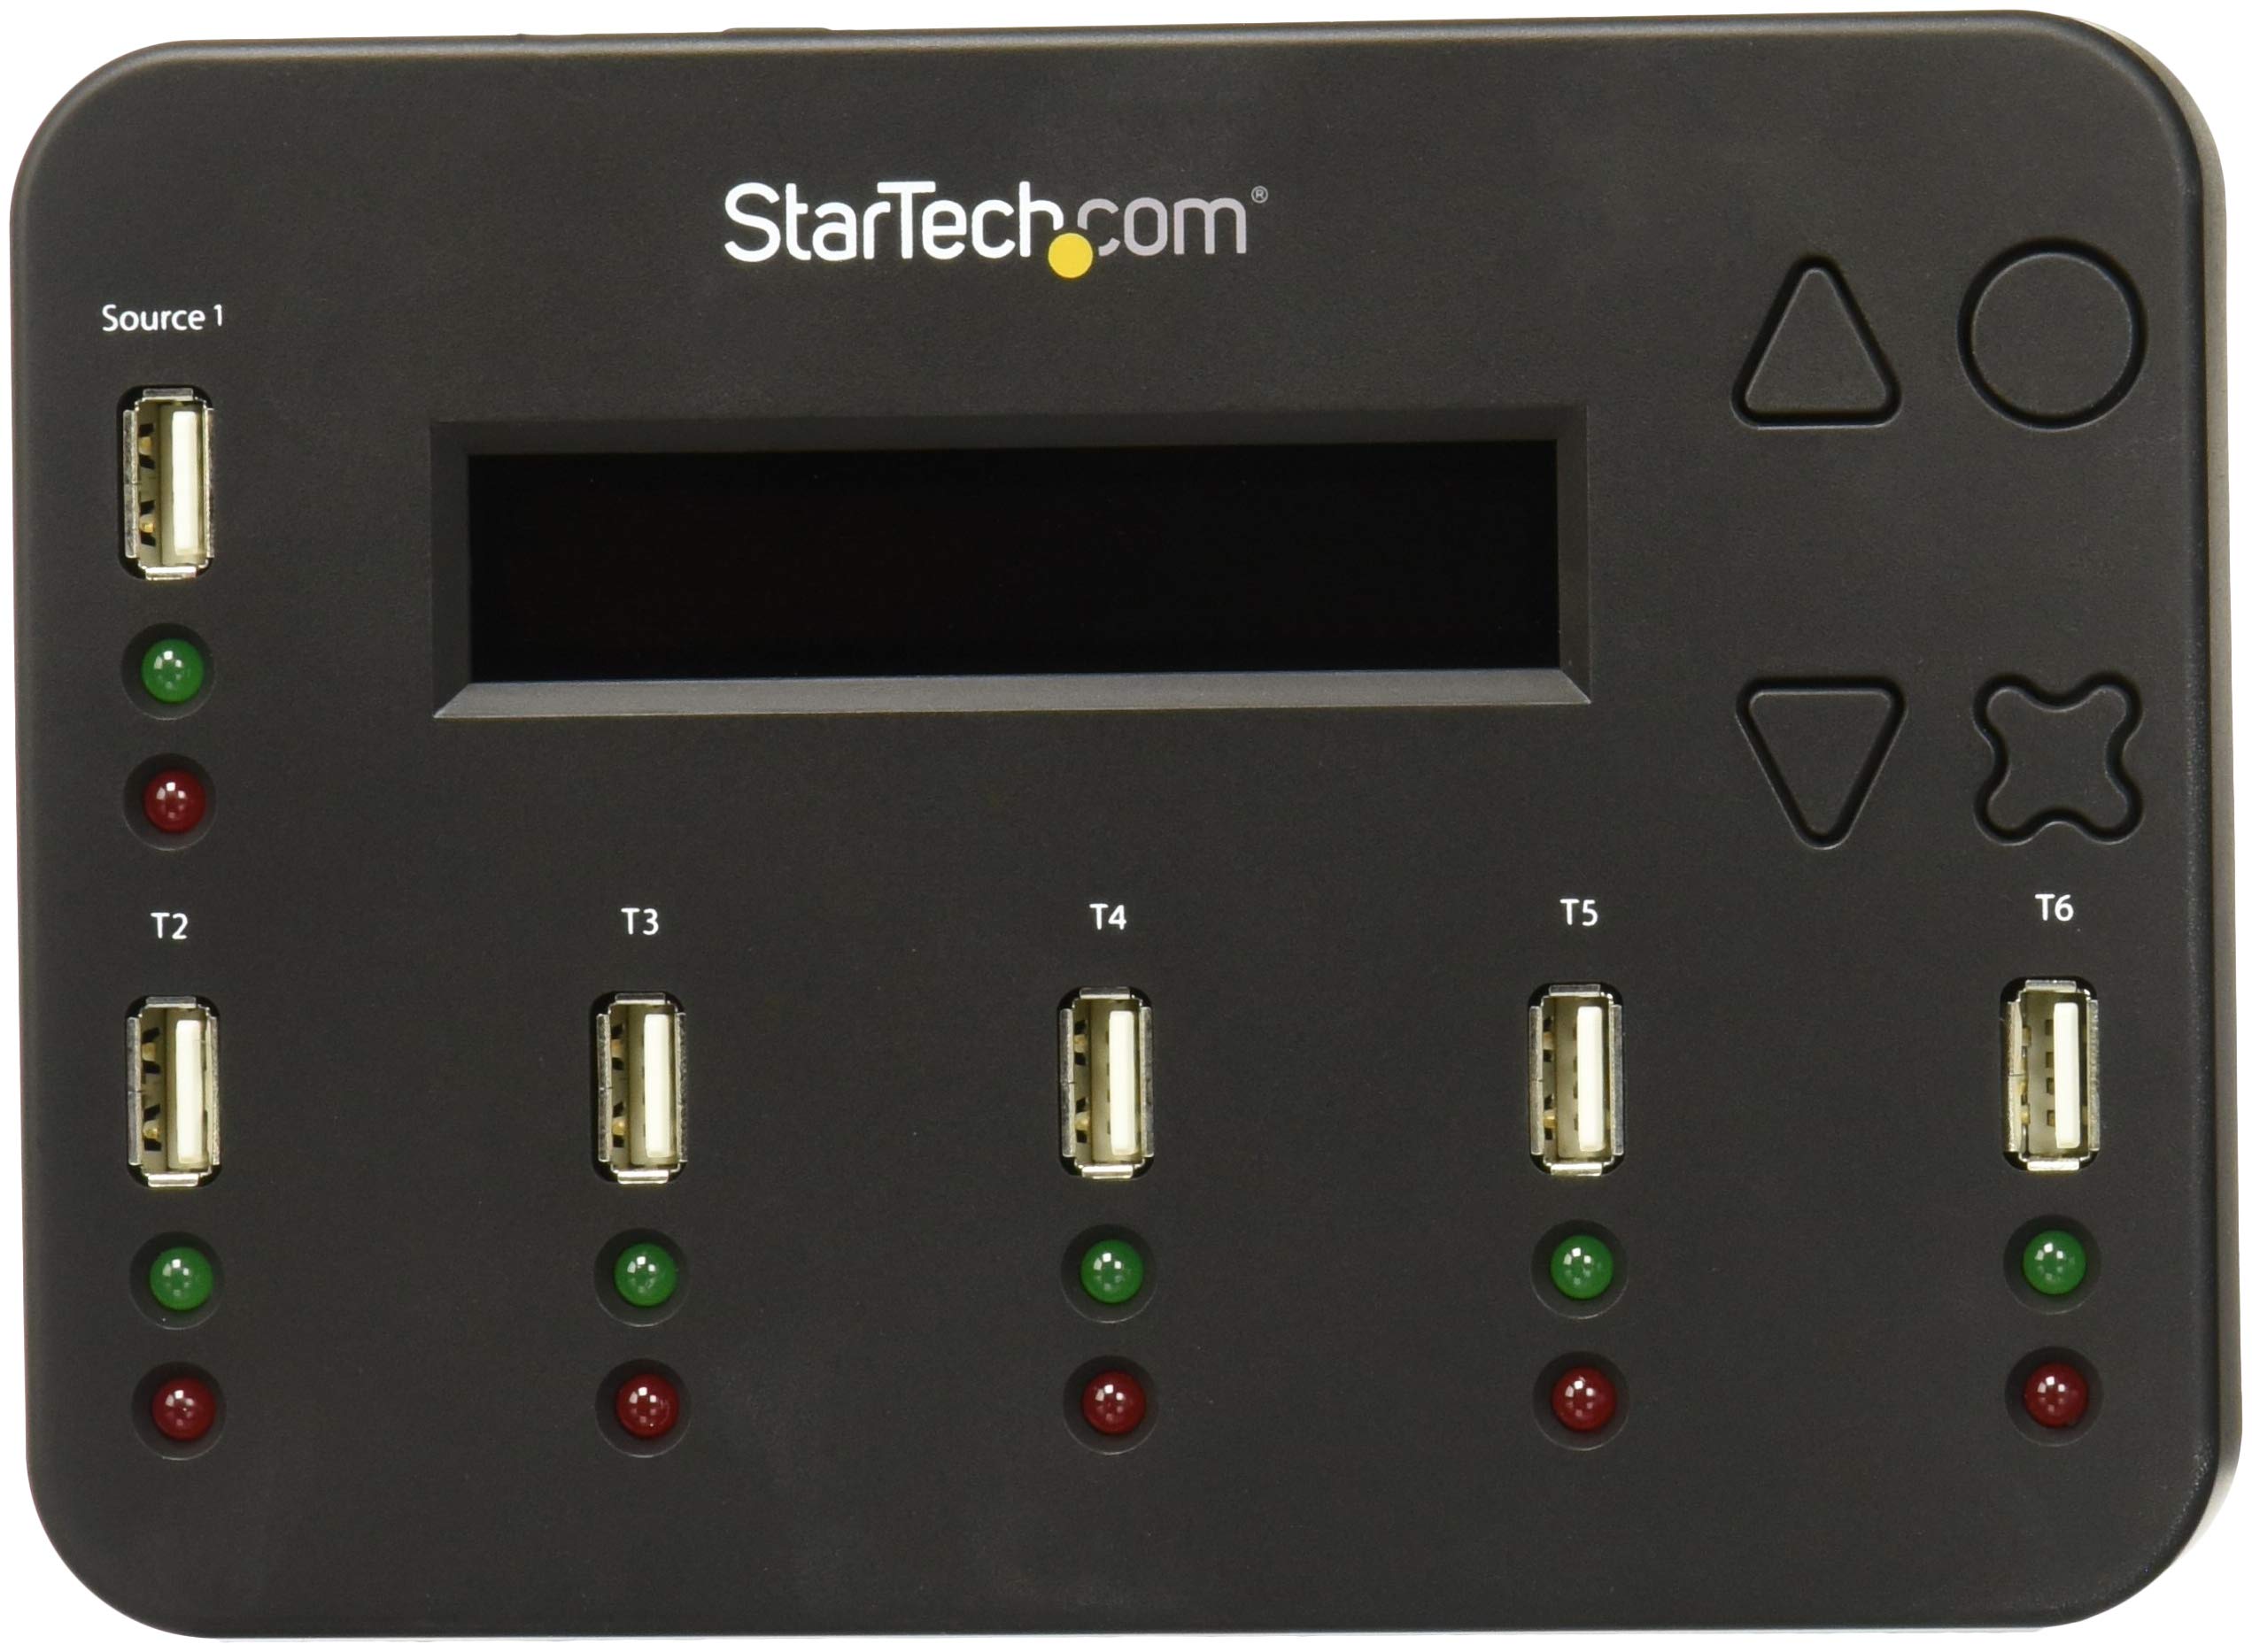 StarTech.com Standalone 1 to 5 USB Flash Drive Duplicator / Cloner / Eraser, Multiple USB Thumb Drive Copier / Sanitizer, System File / Sector-by-Sector Copy, 1.5 GB/min, 3-Pass Erase, LCD (USBDUP15)